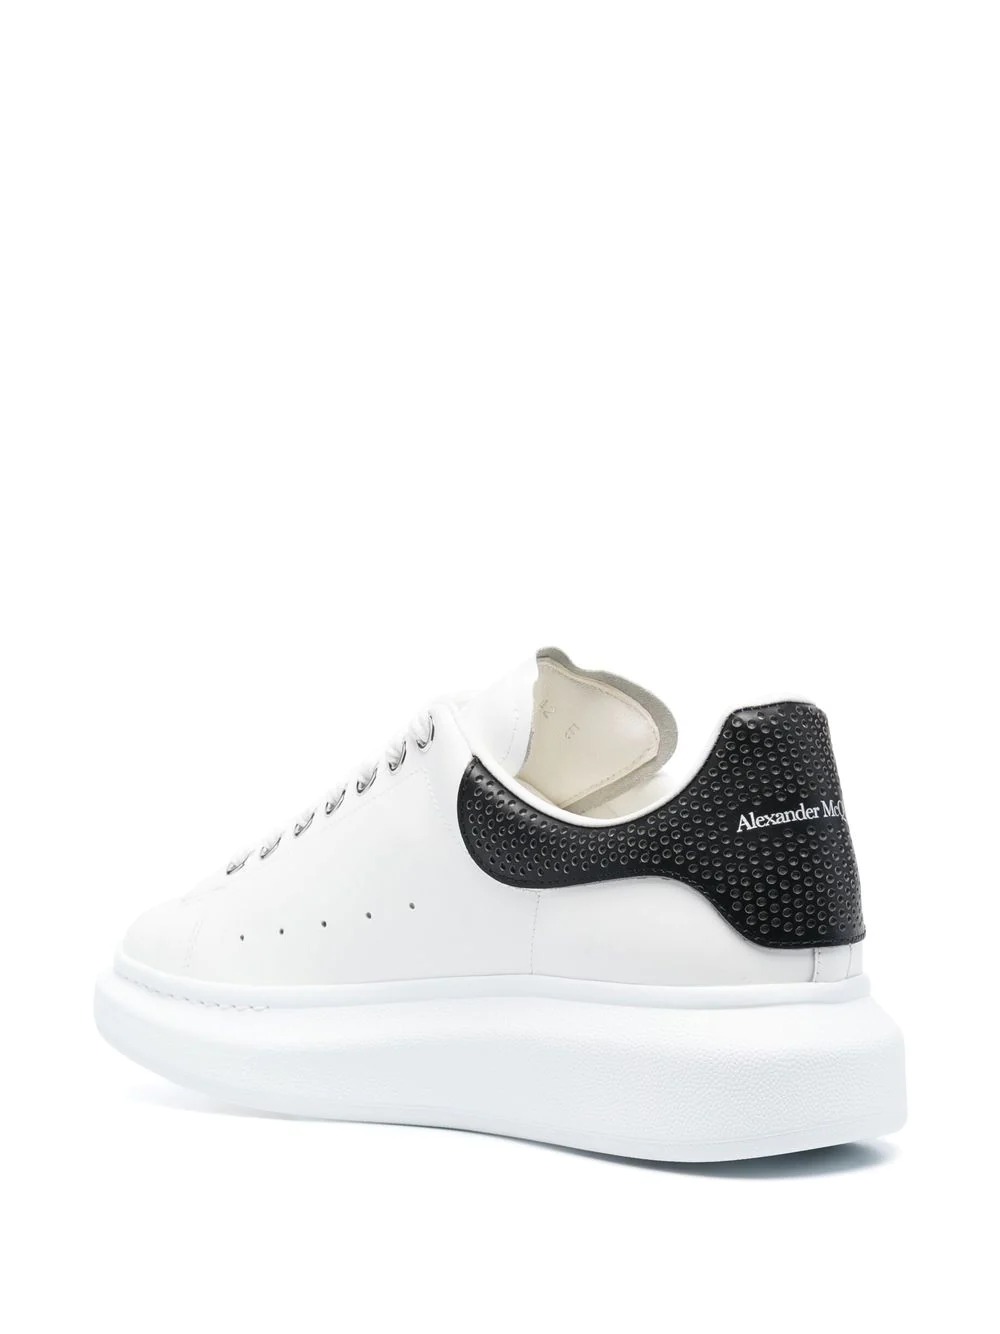 White Oversize Sneakers With Perforated Black Spoiler ALEXANDER MCQUEEN  Russocapri